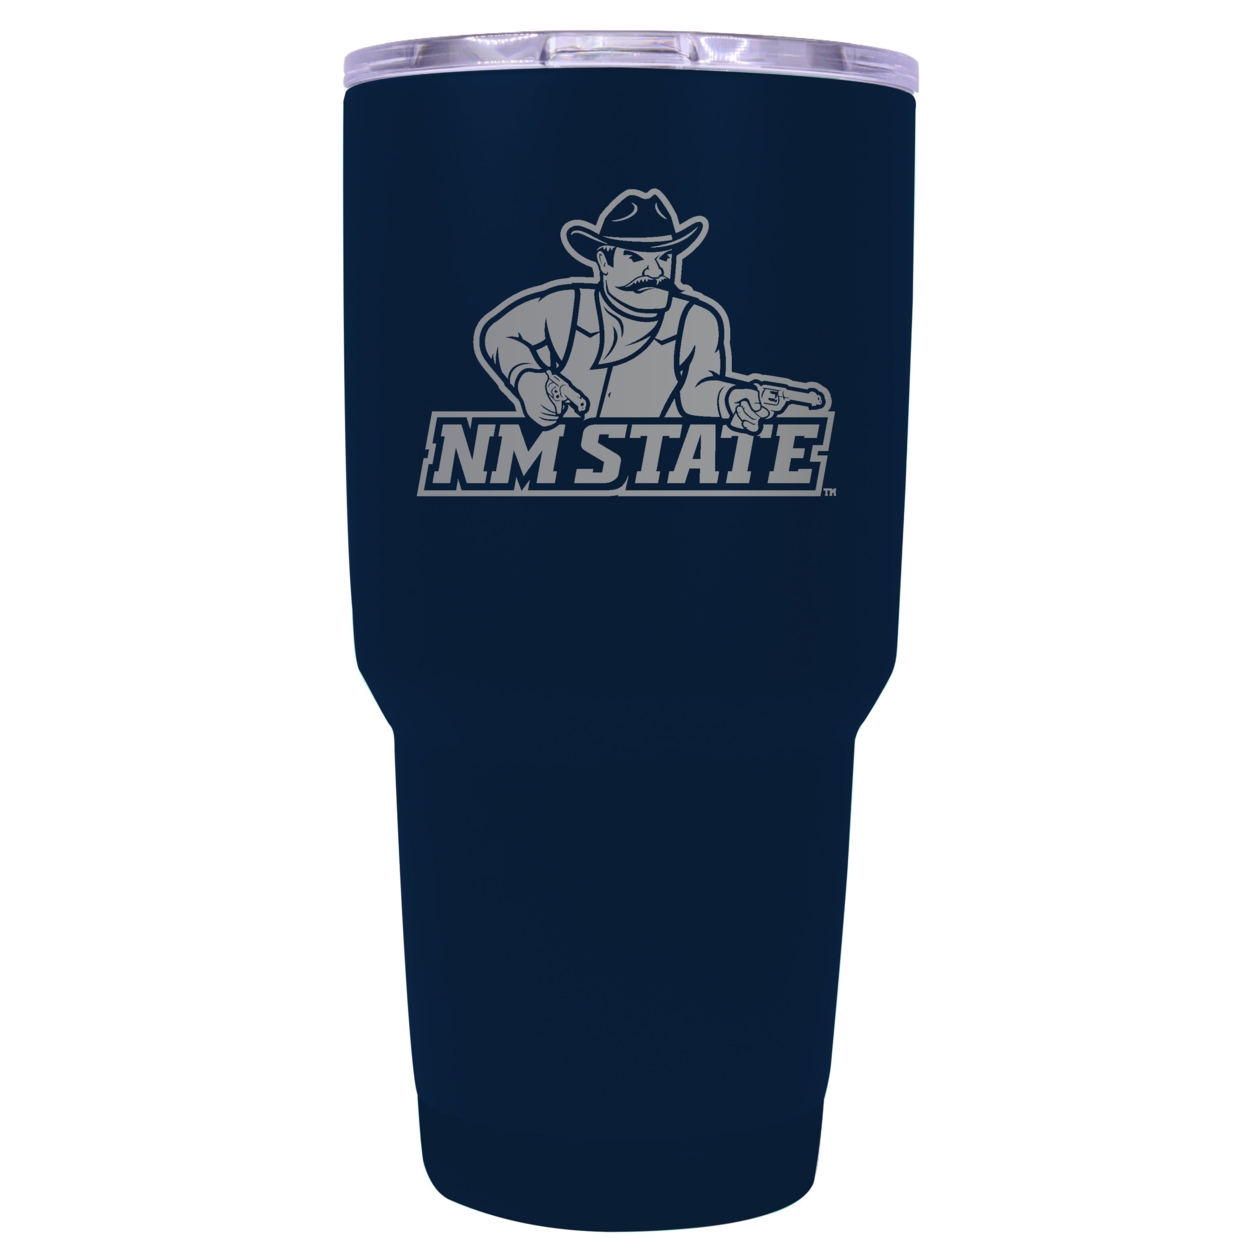 New Mexico State University Pistol Pete 24 Oz Laser Engraved Stainless Steel Insulated Tumbler - Choose Your Color. - Navy